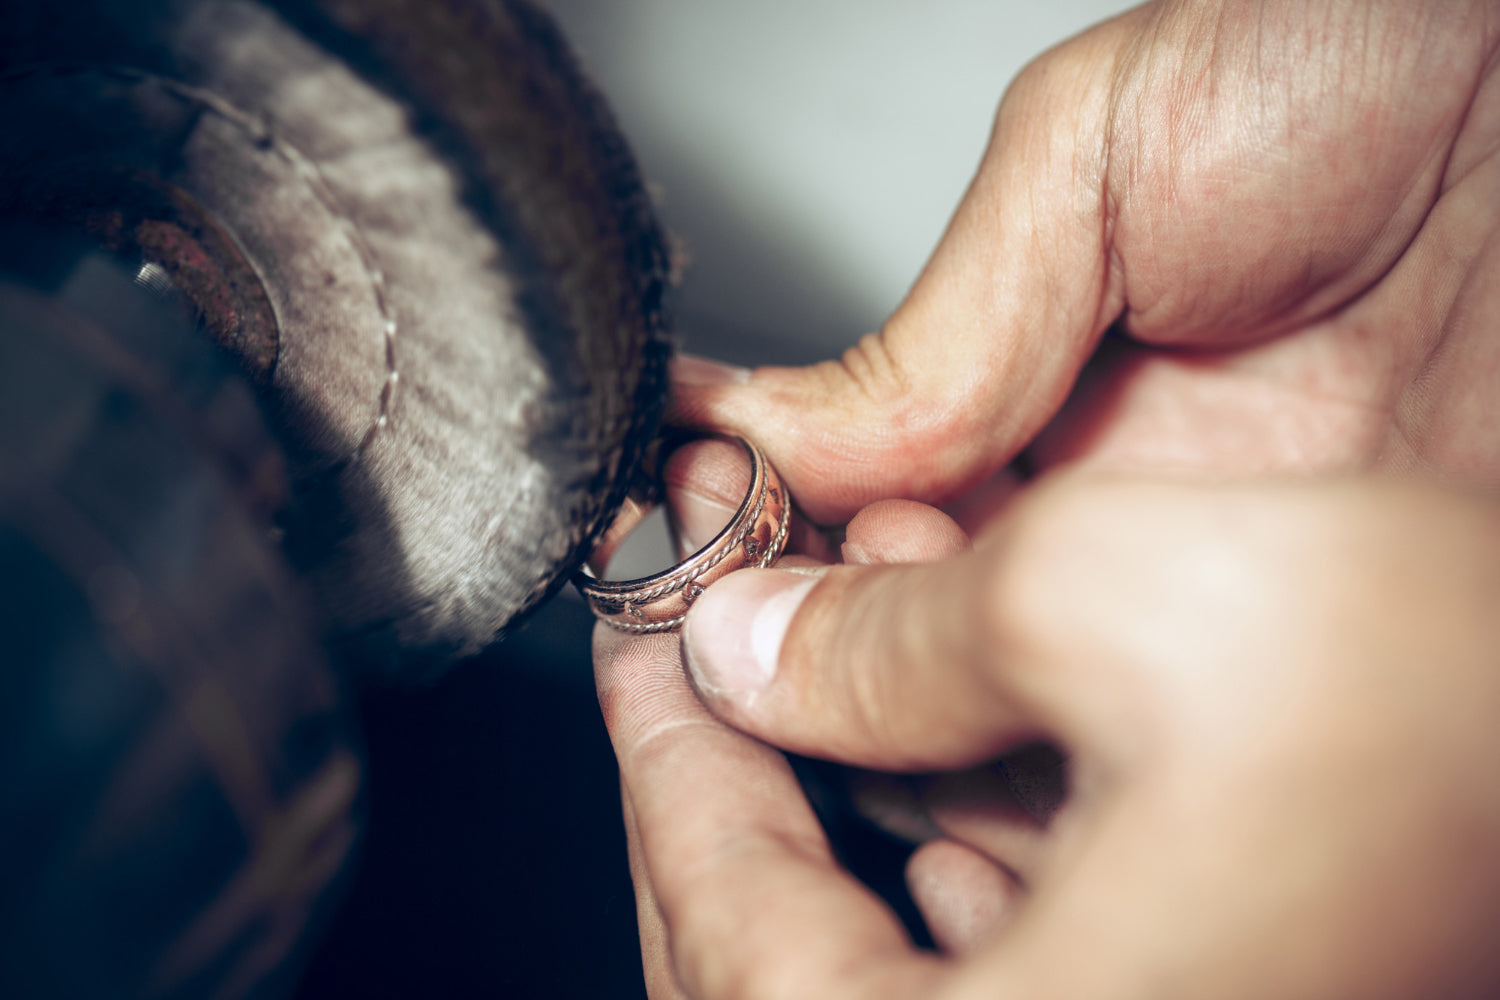 Cleaning of a ring by an expert for its optimum brilliance